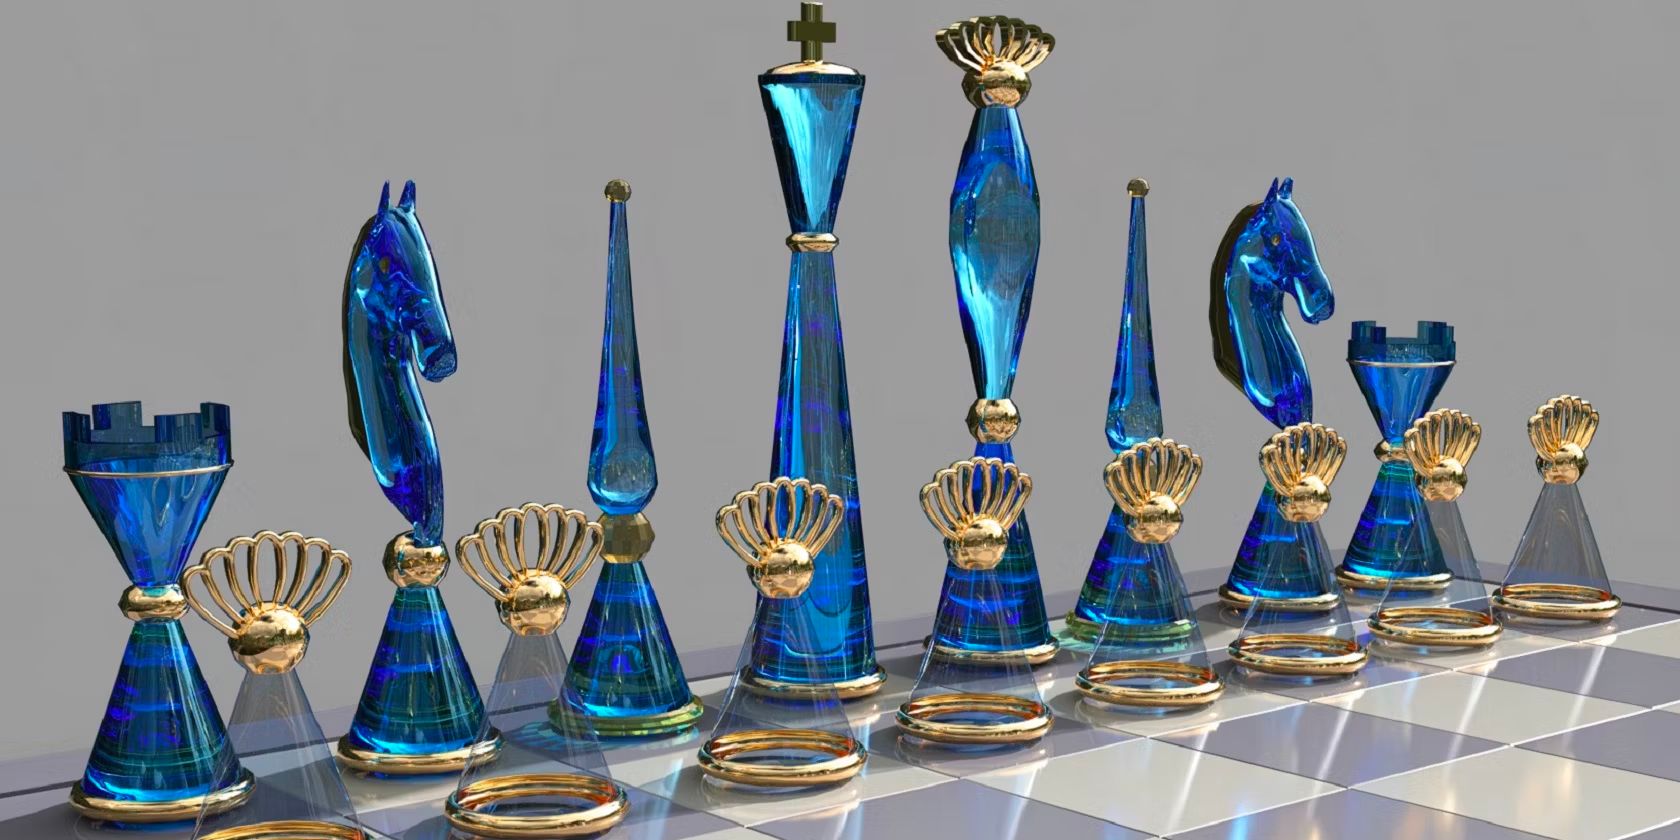 A grey and white chess board with blue glass pieces